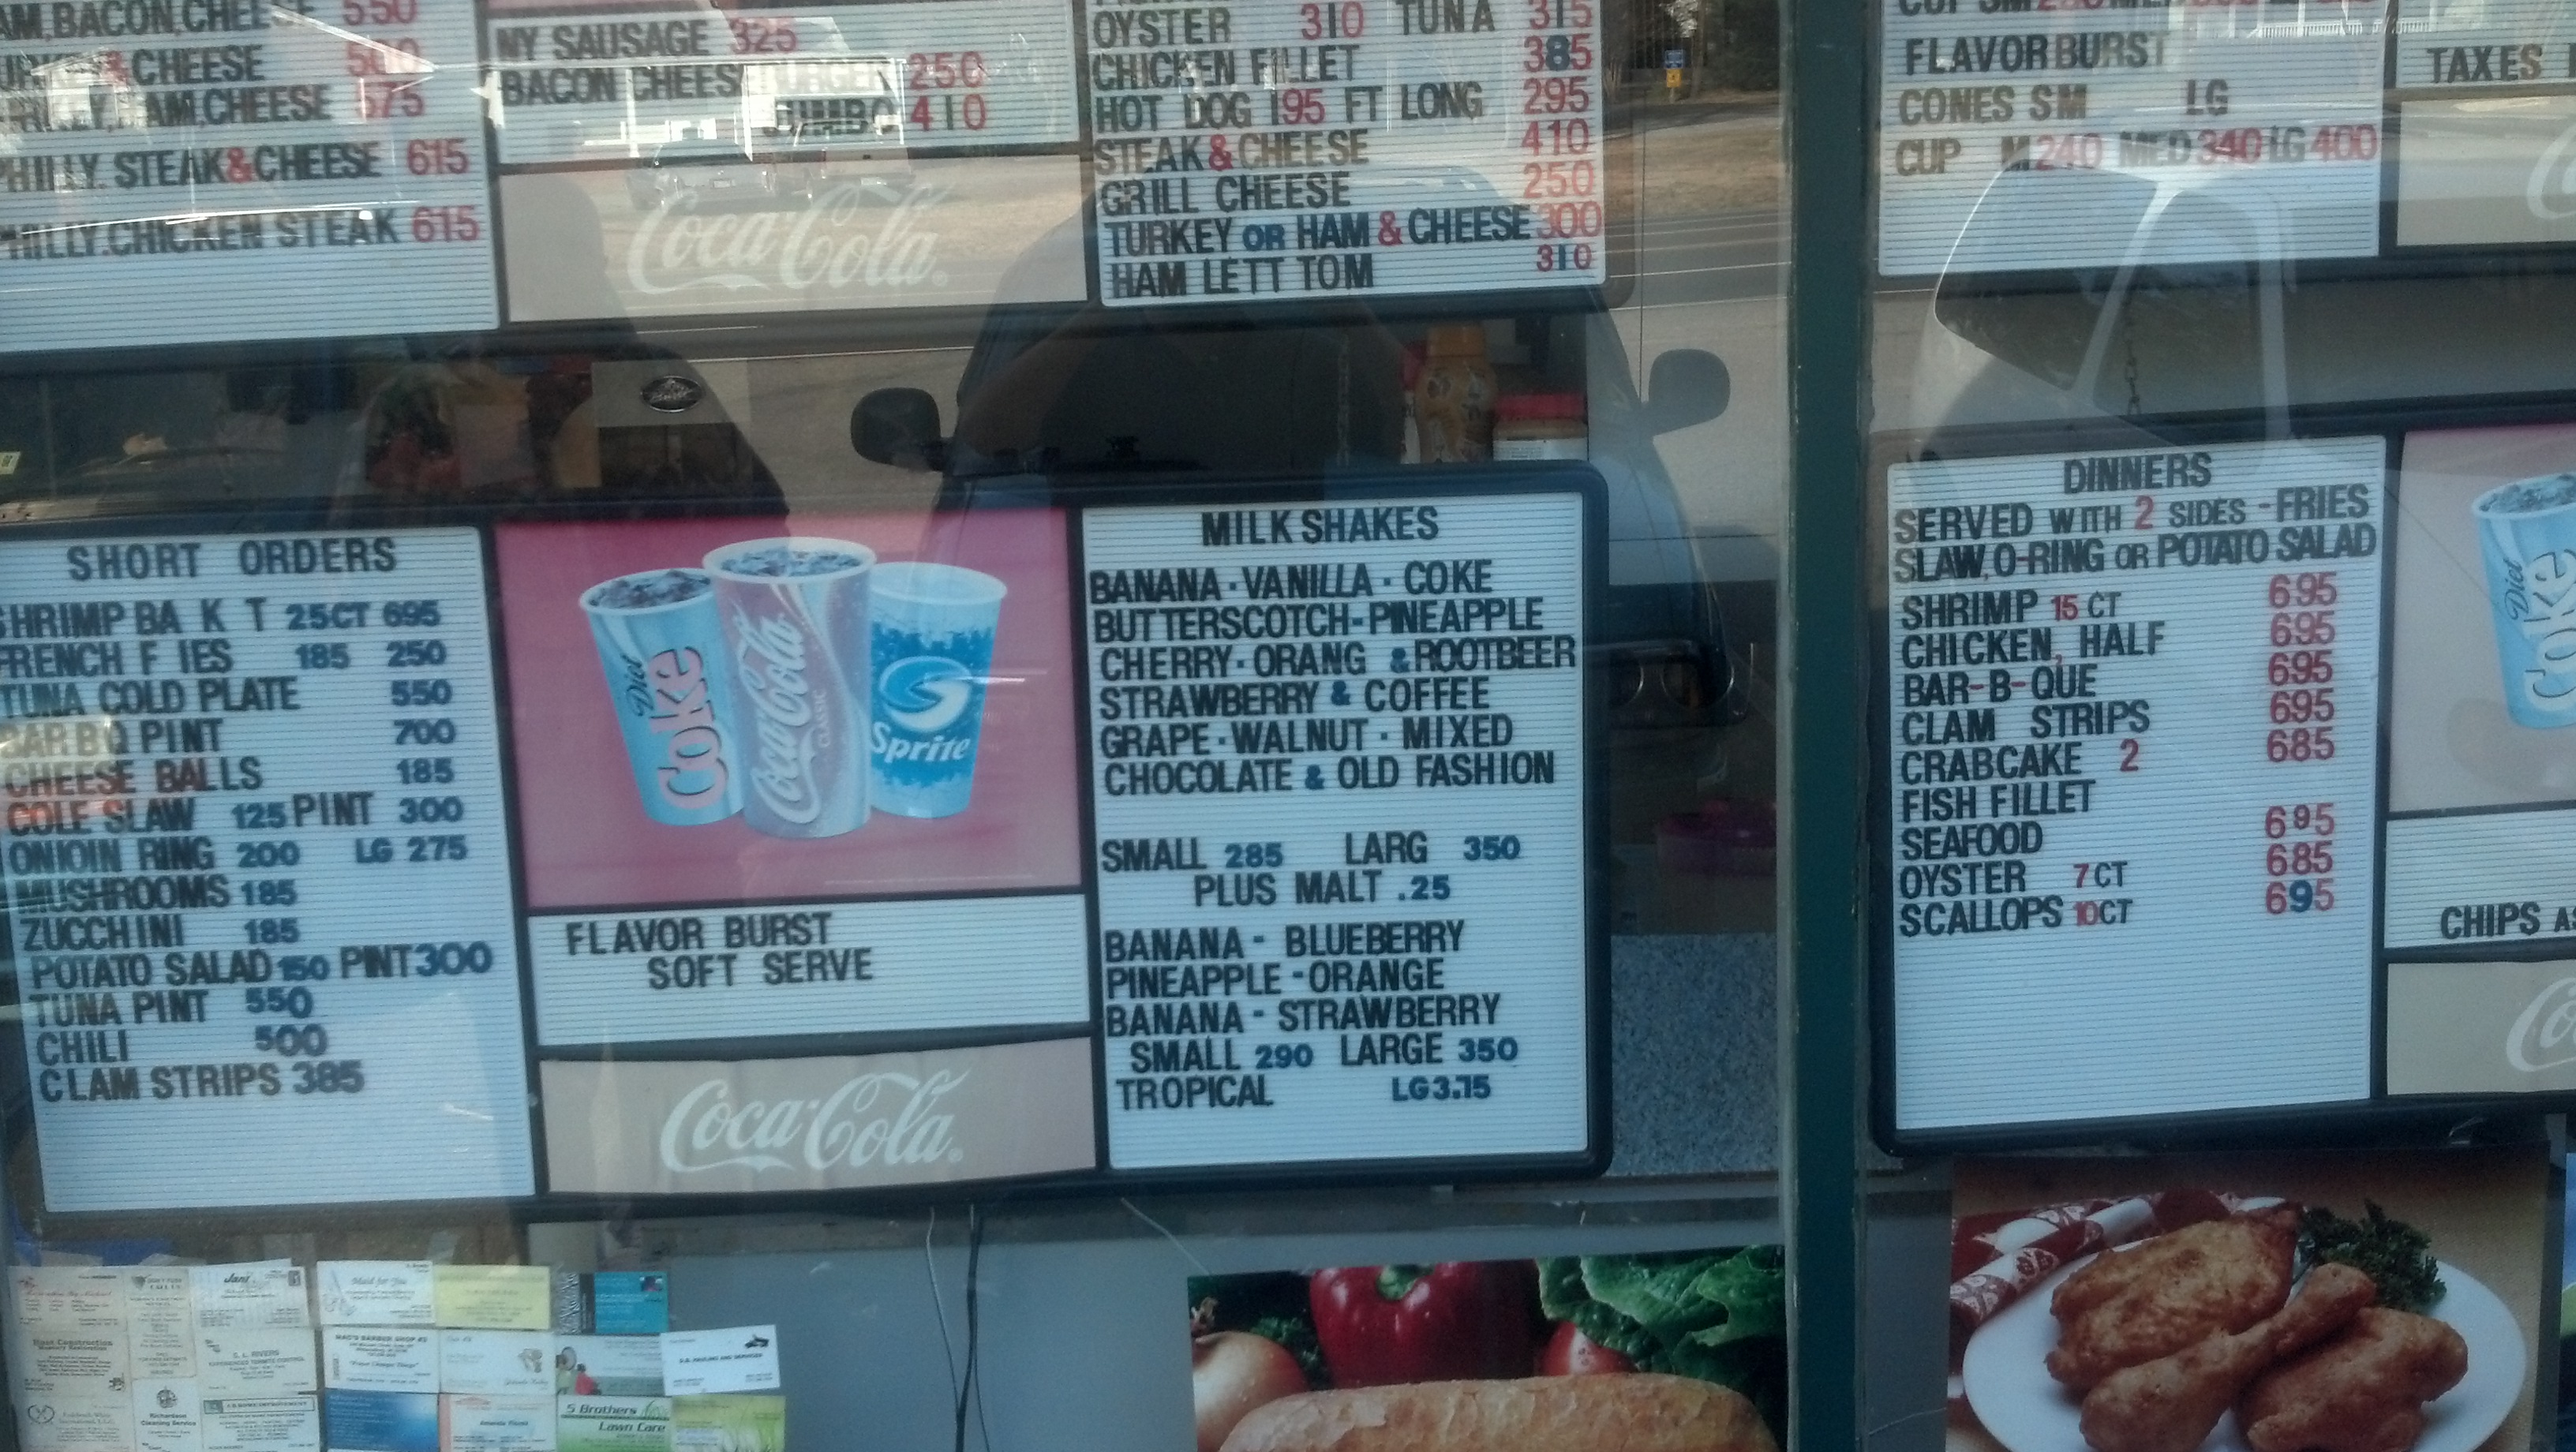 Extensive list of house made milk shakes.